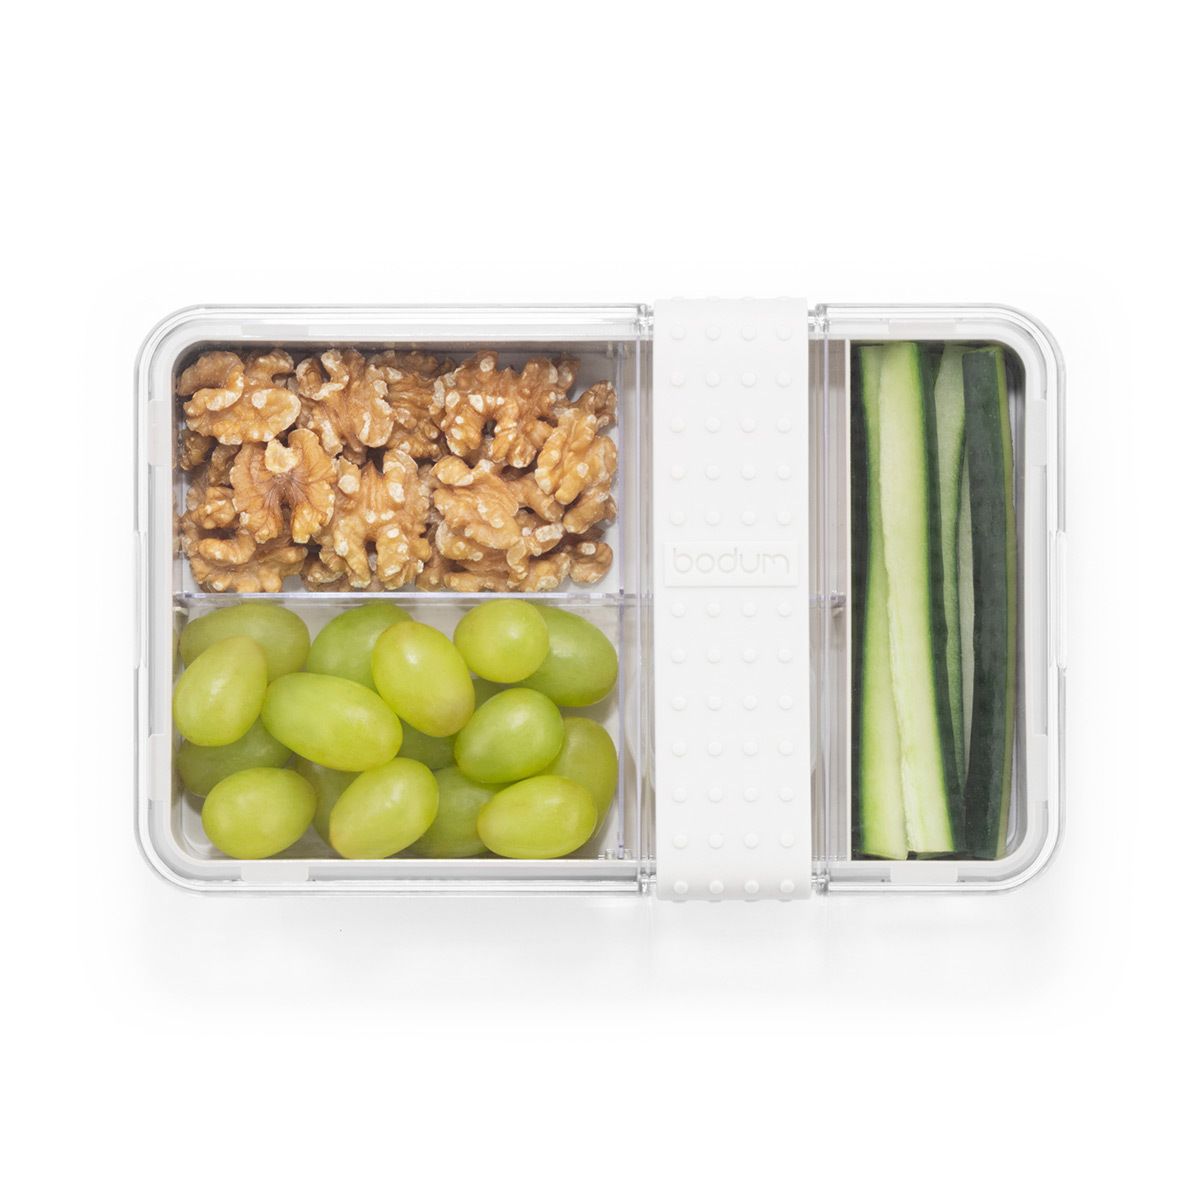 Bodum Bistro Recycled Plastic Lunch Box with Cutlery – MoMA Design Store